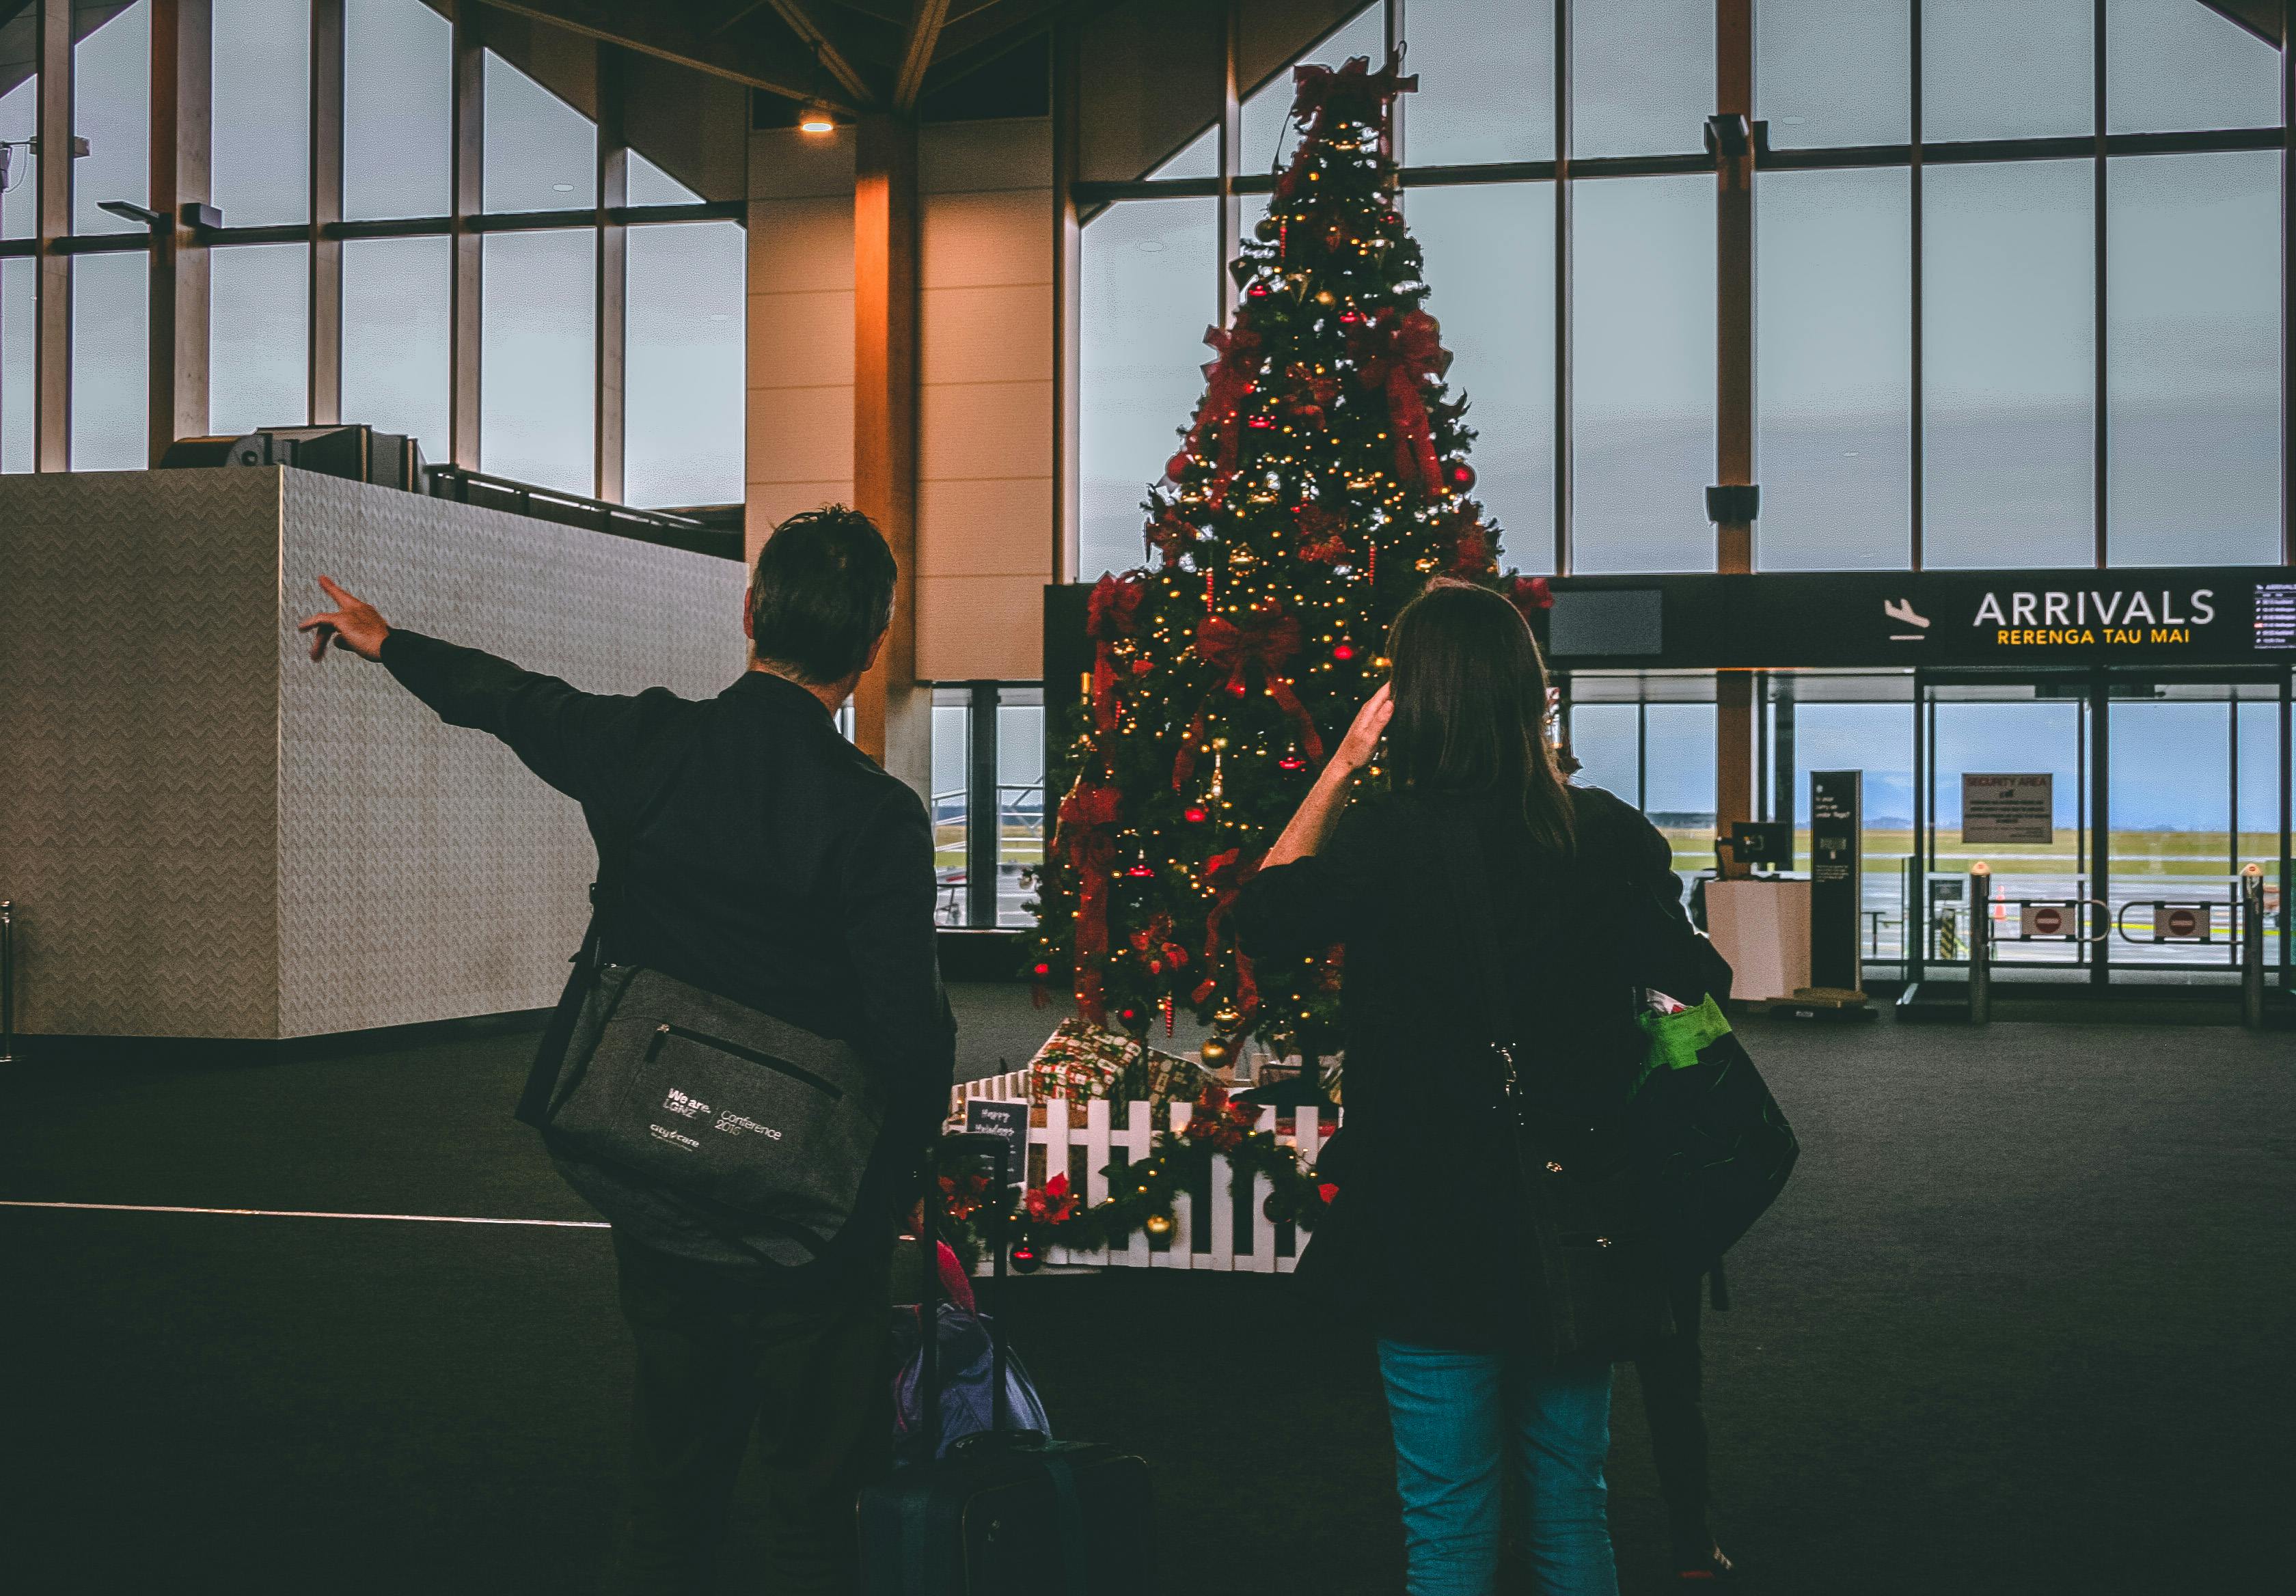 A couple at the airport | Source: Pexels